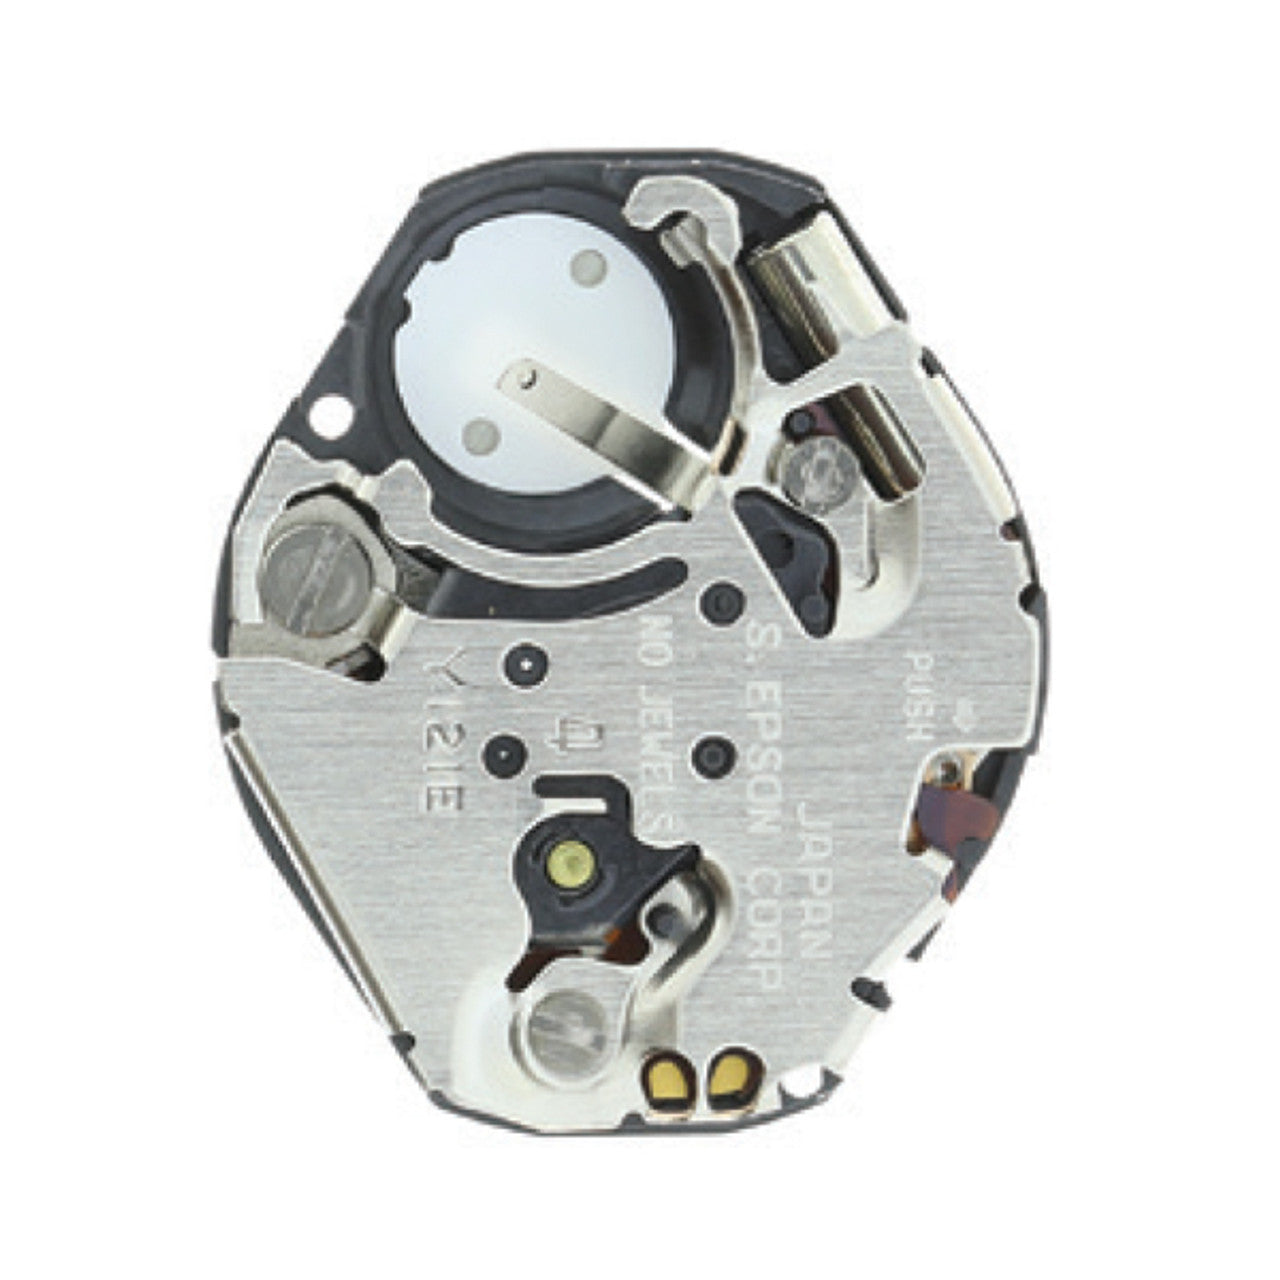 Y121E Height 6 Epson Watch Movement